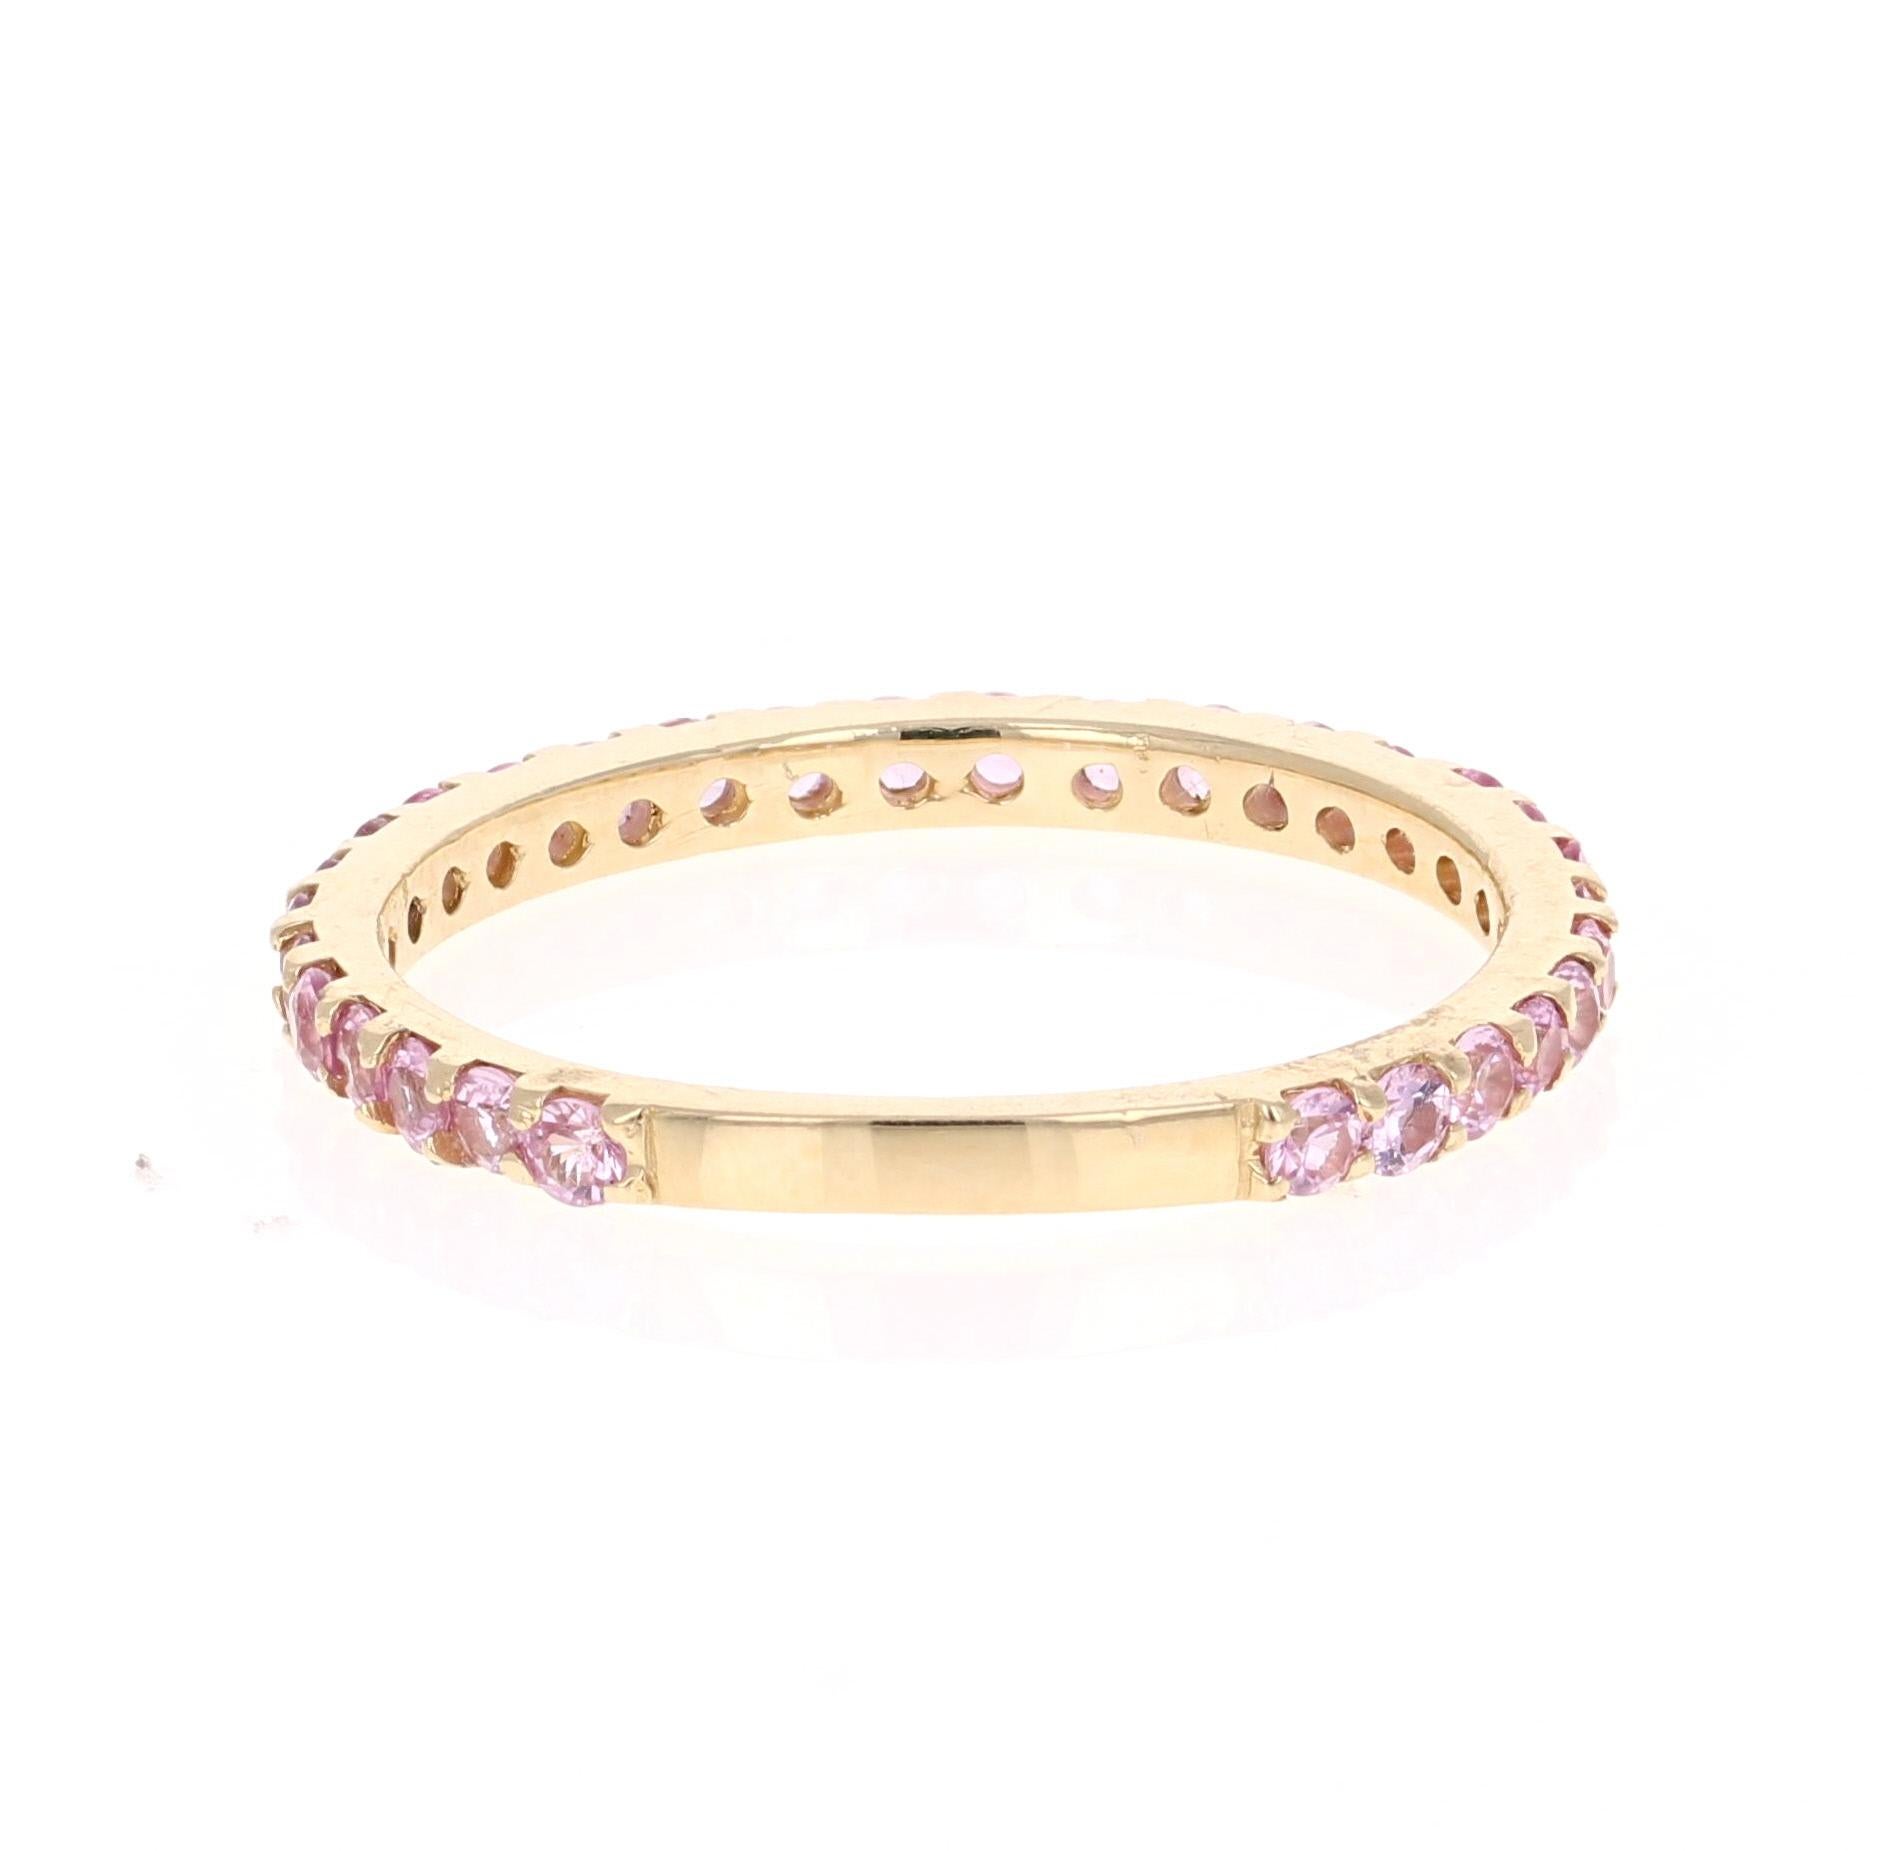 0.92 Carat Round Cut Pink Sapphire Band 14 Karat Yellow Gold In New Condition For Sale In Los Angeles, CA